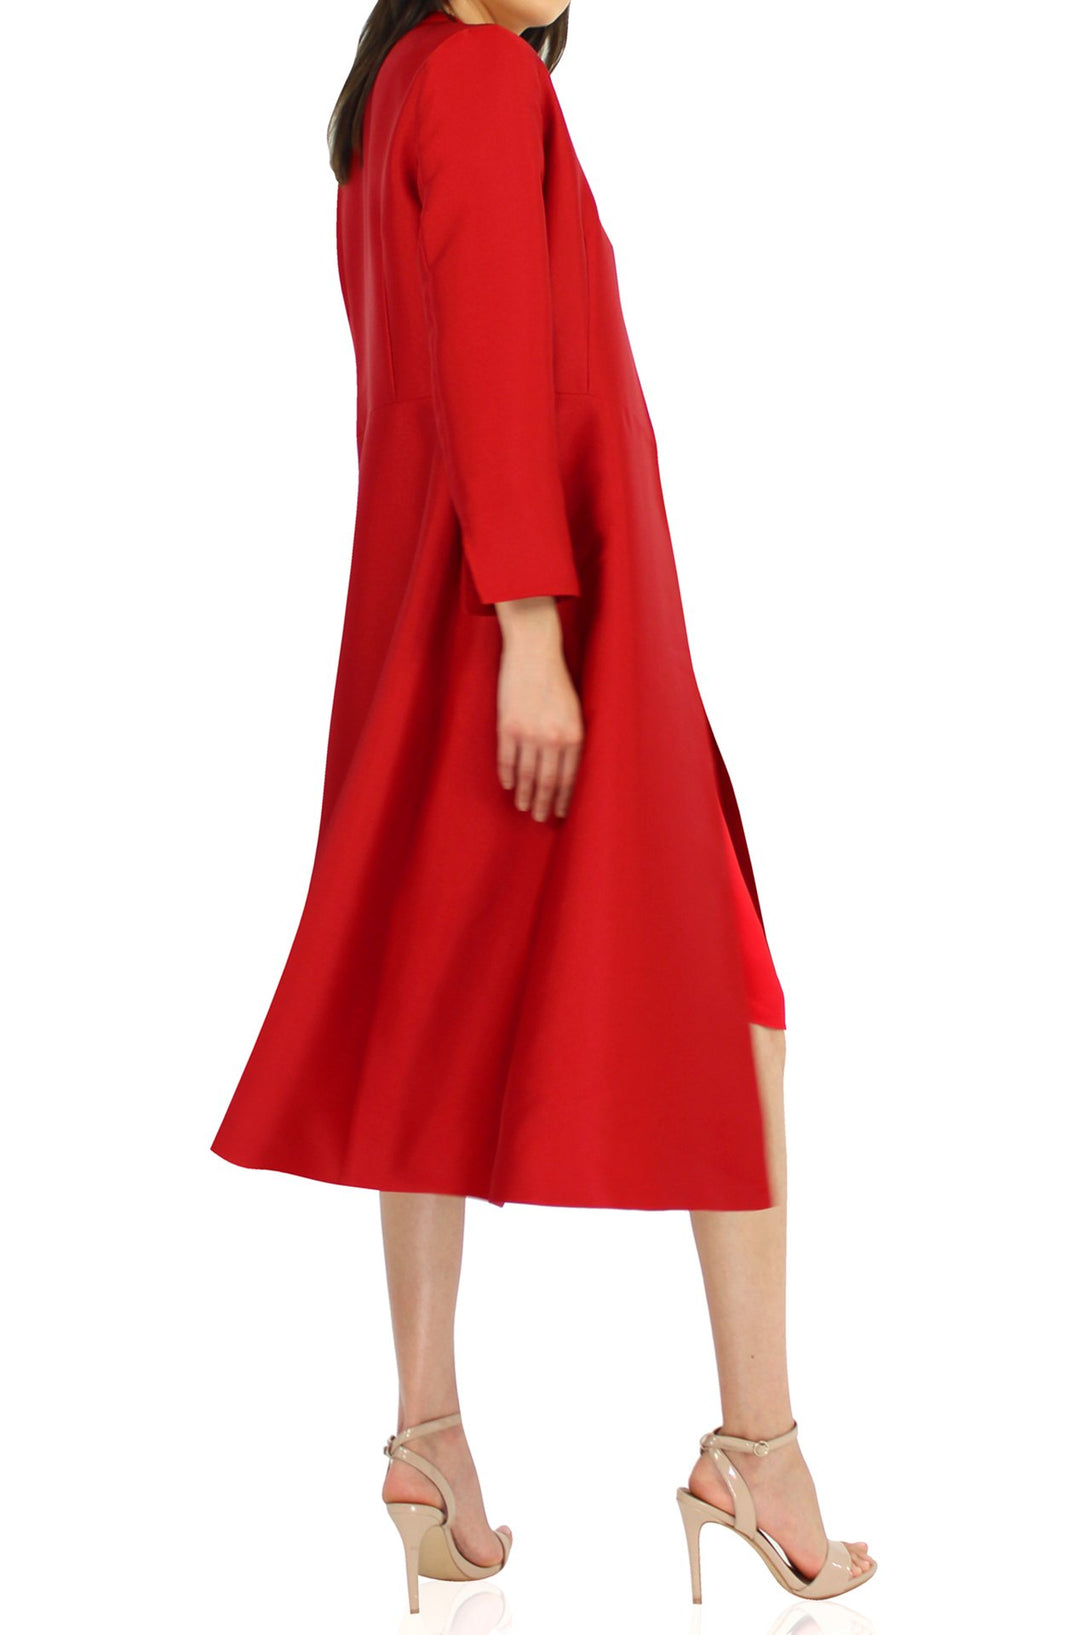 Long-Belted-Robe-In-Red-By-Kyle-Richard